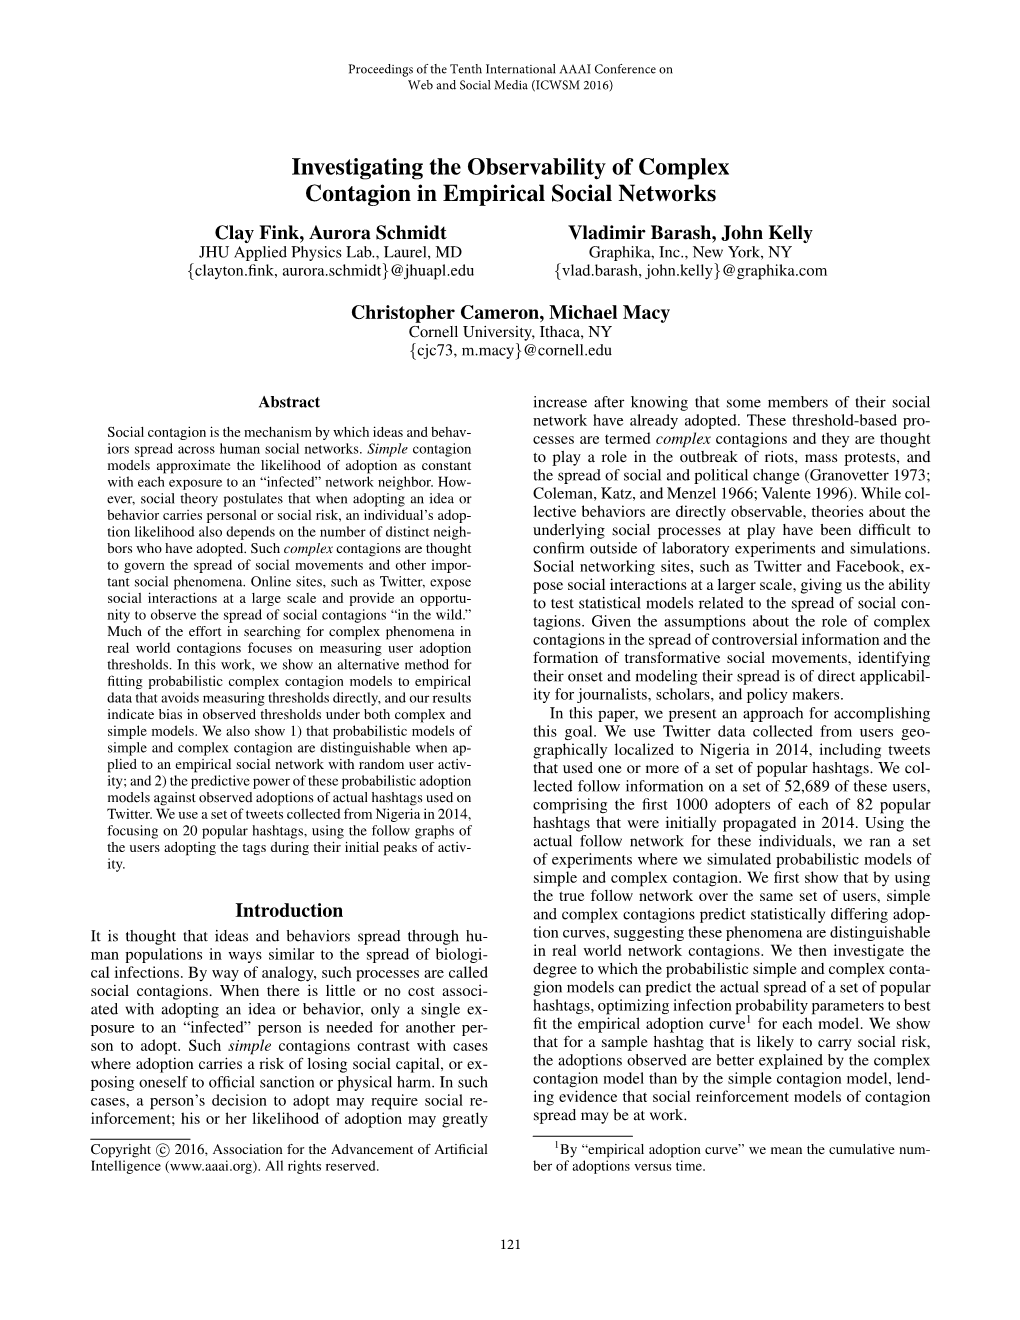 Investigating the Observability of Complex Contagion in Empirical